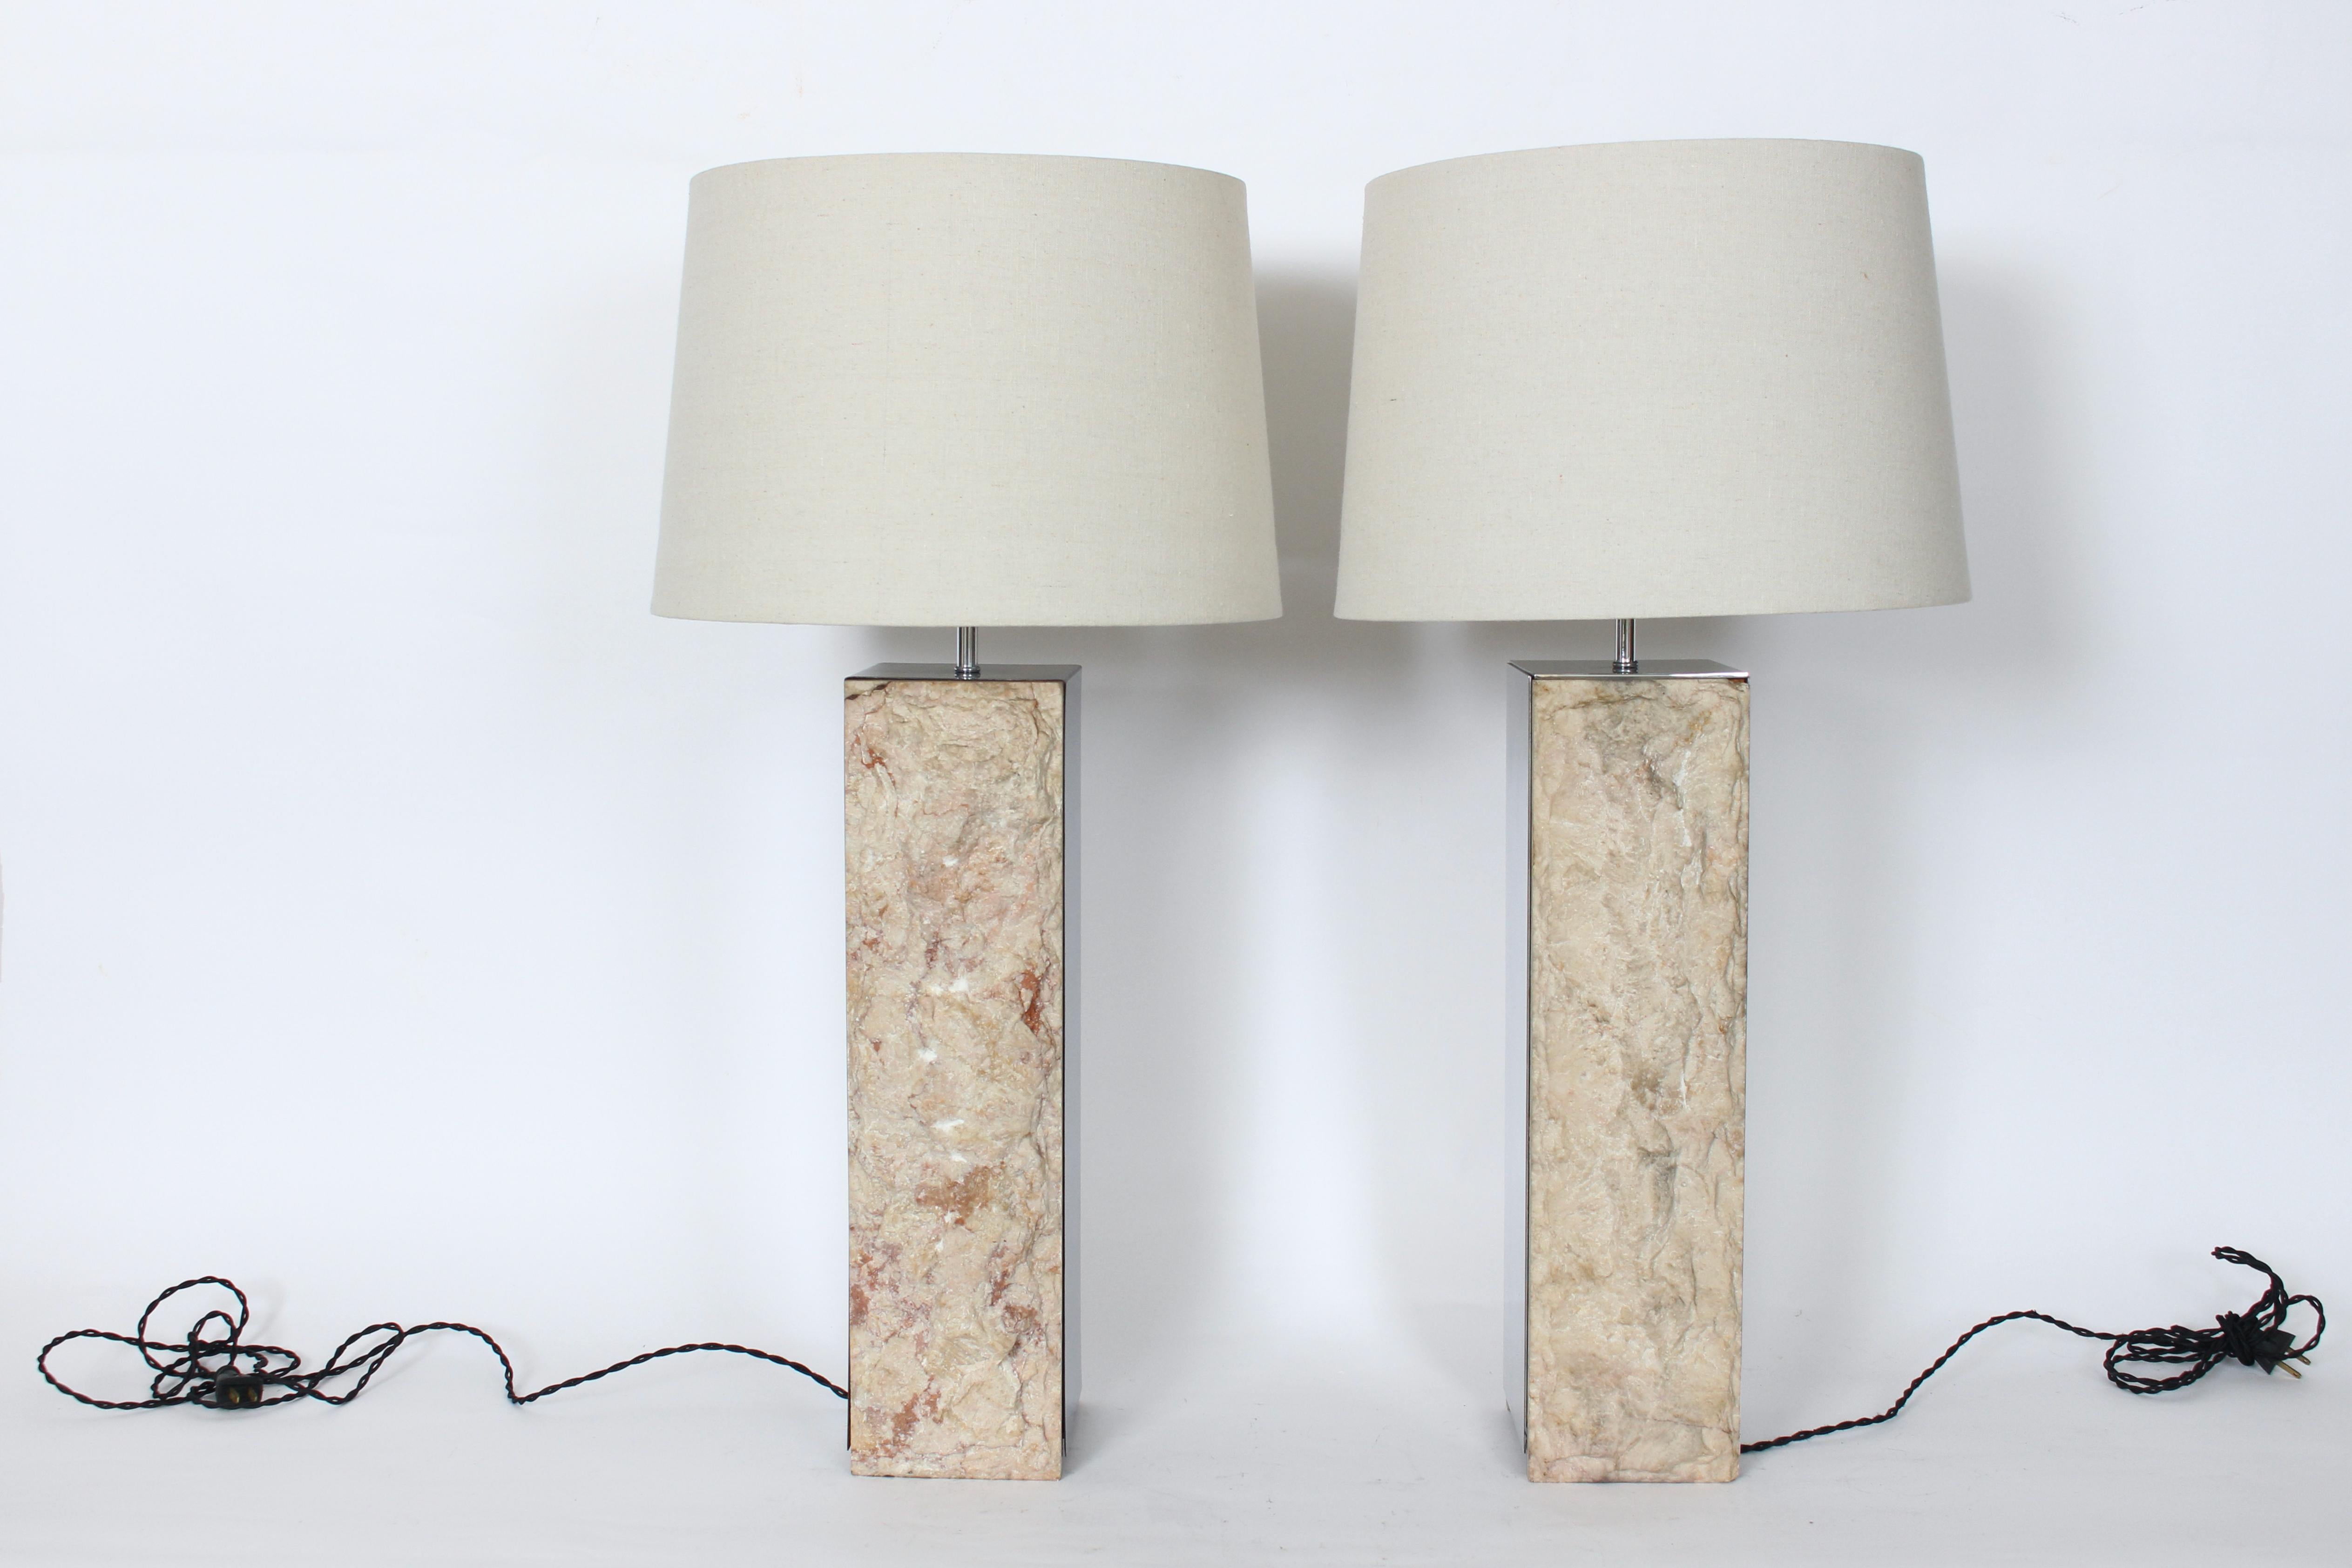 Pair of Laurel Lamp Co. attributed Rough Cut Marble & Polished Aluminum Table Lamps.  Featuring two, two sided panels, with two in Cream, Beige, Taupe with hints of Pink Italian Marble and two reflective (18.5H x 5D) polished Aluminum Mirrored